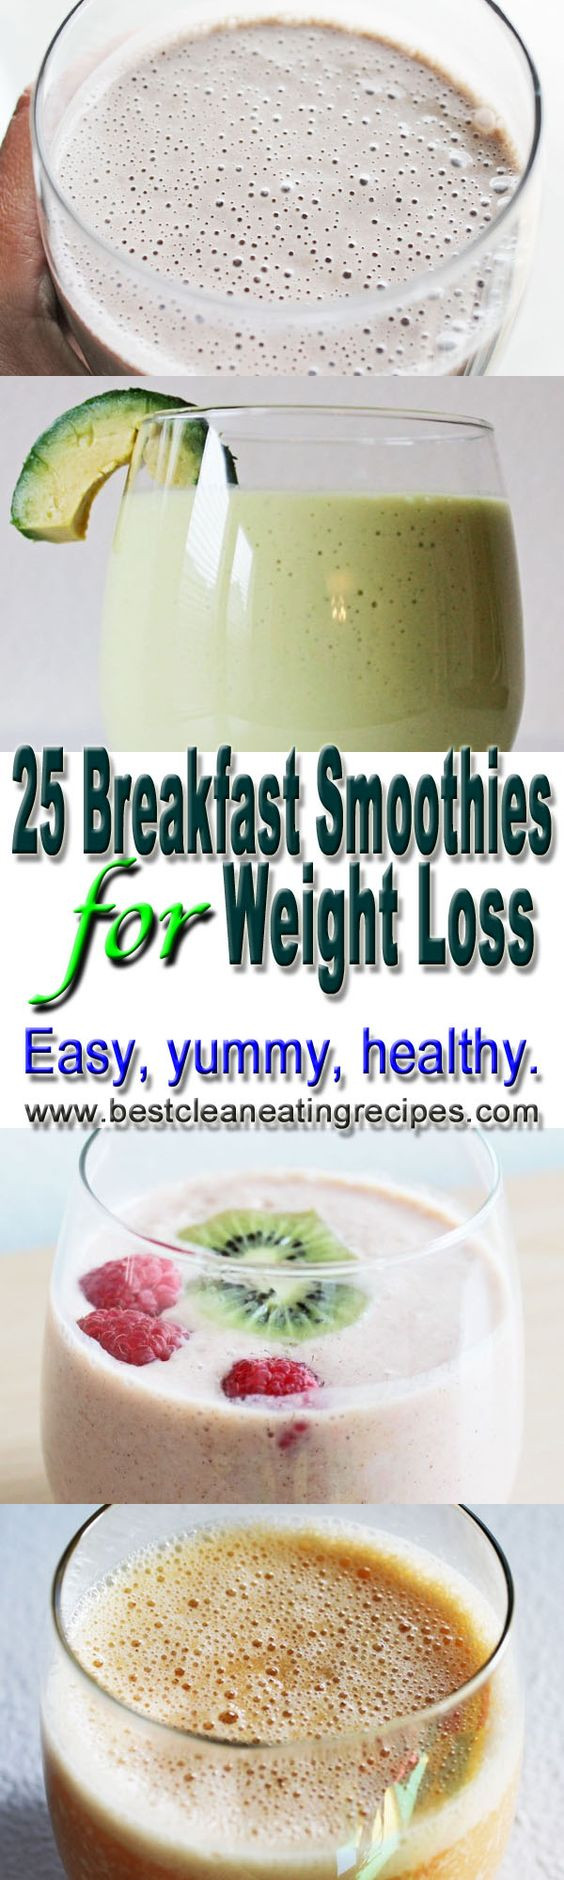 Easy Healthy Breakfast For Weight Loss
 Pinterest • The world’s catalog of ideas